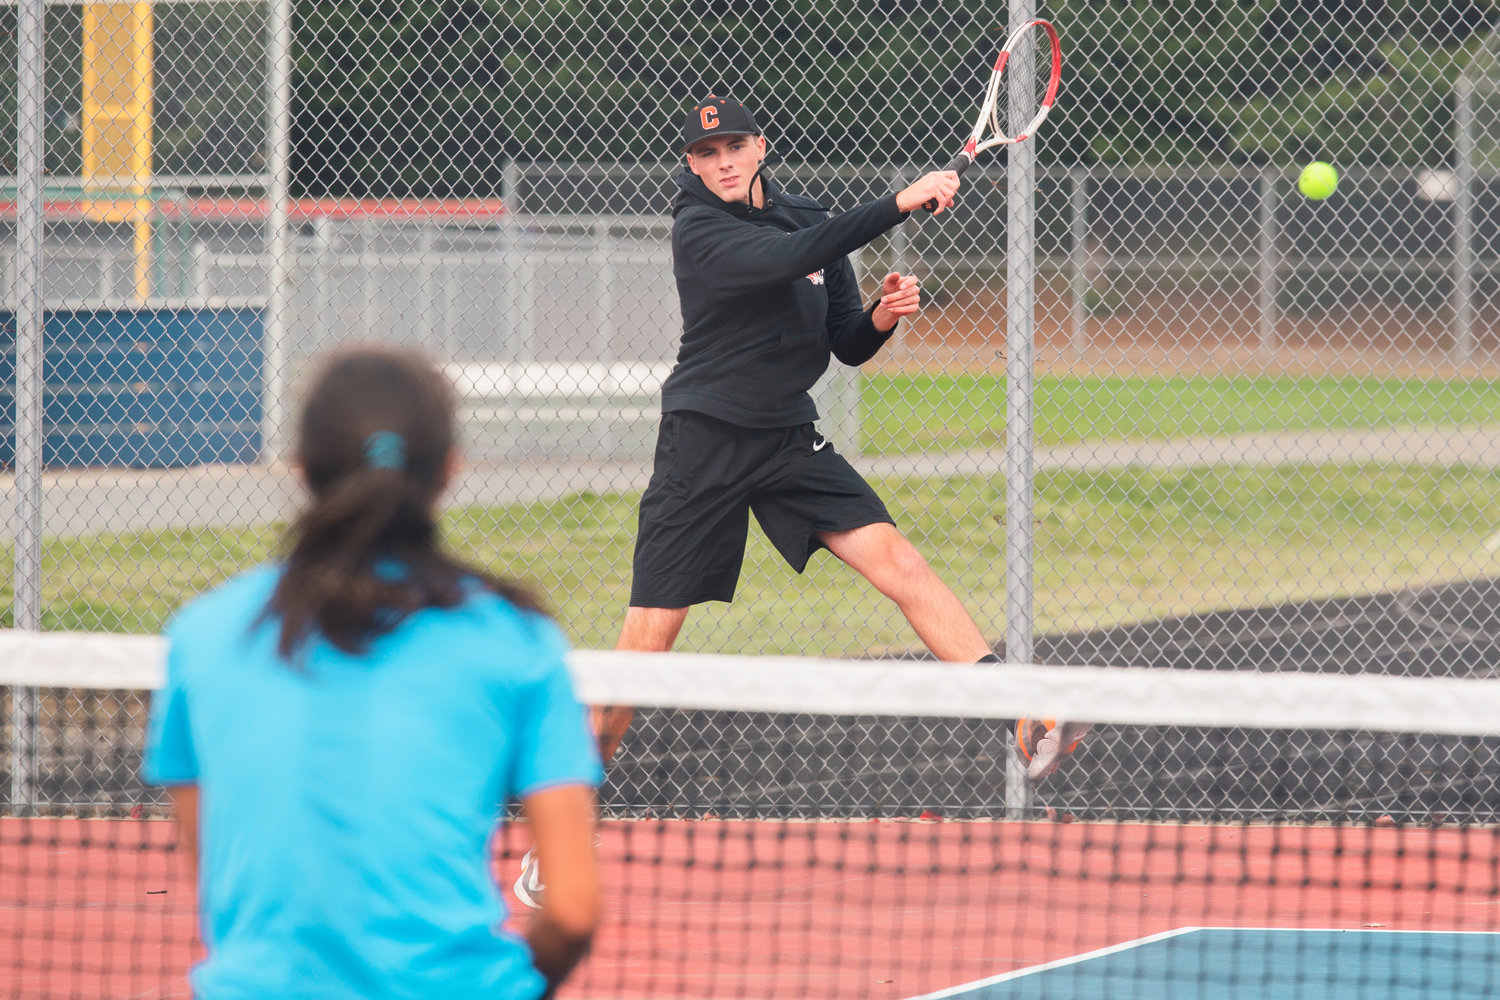 Centralia’s Landon Kaut scores with a shot across the net Tuesday afternoon at Black Hills High School.